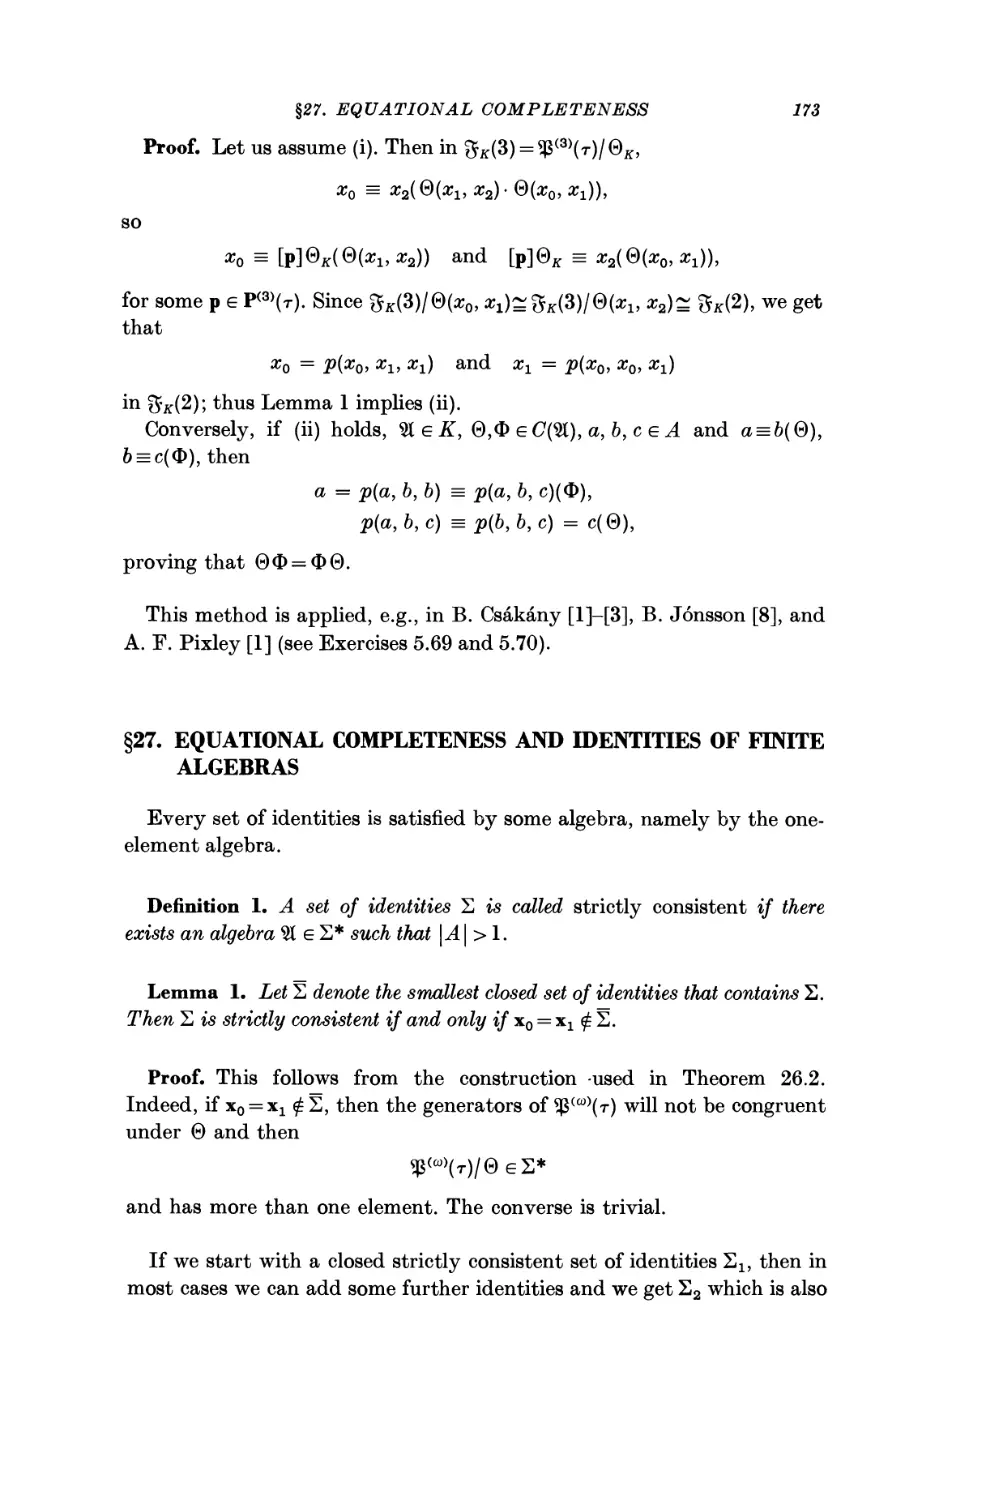 §27. Equational Completeness and Identities of Finite Algebras